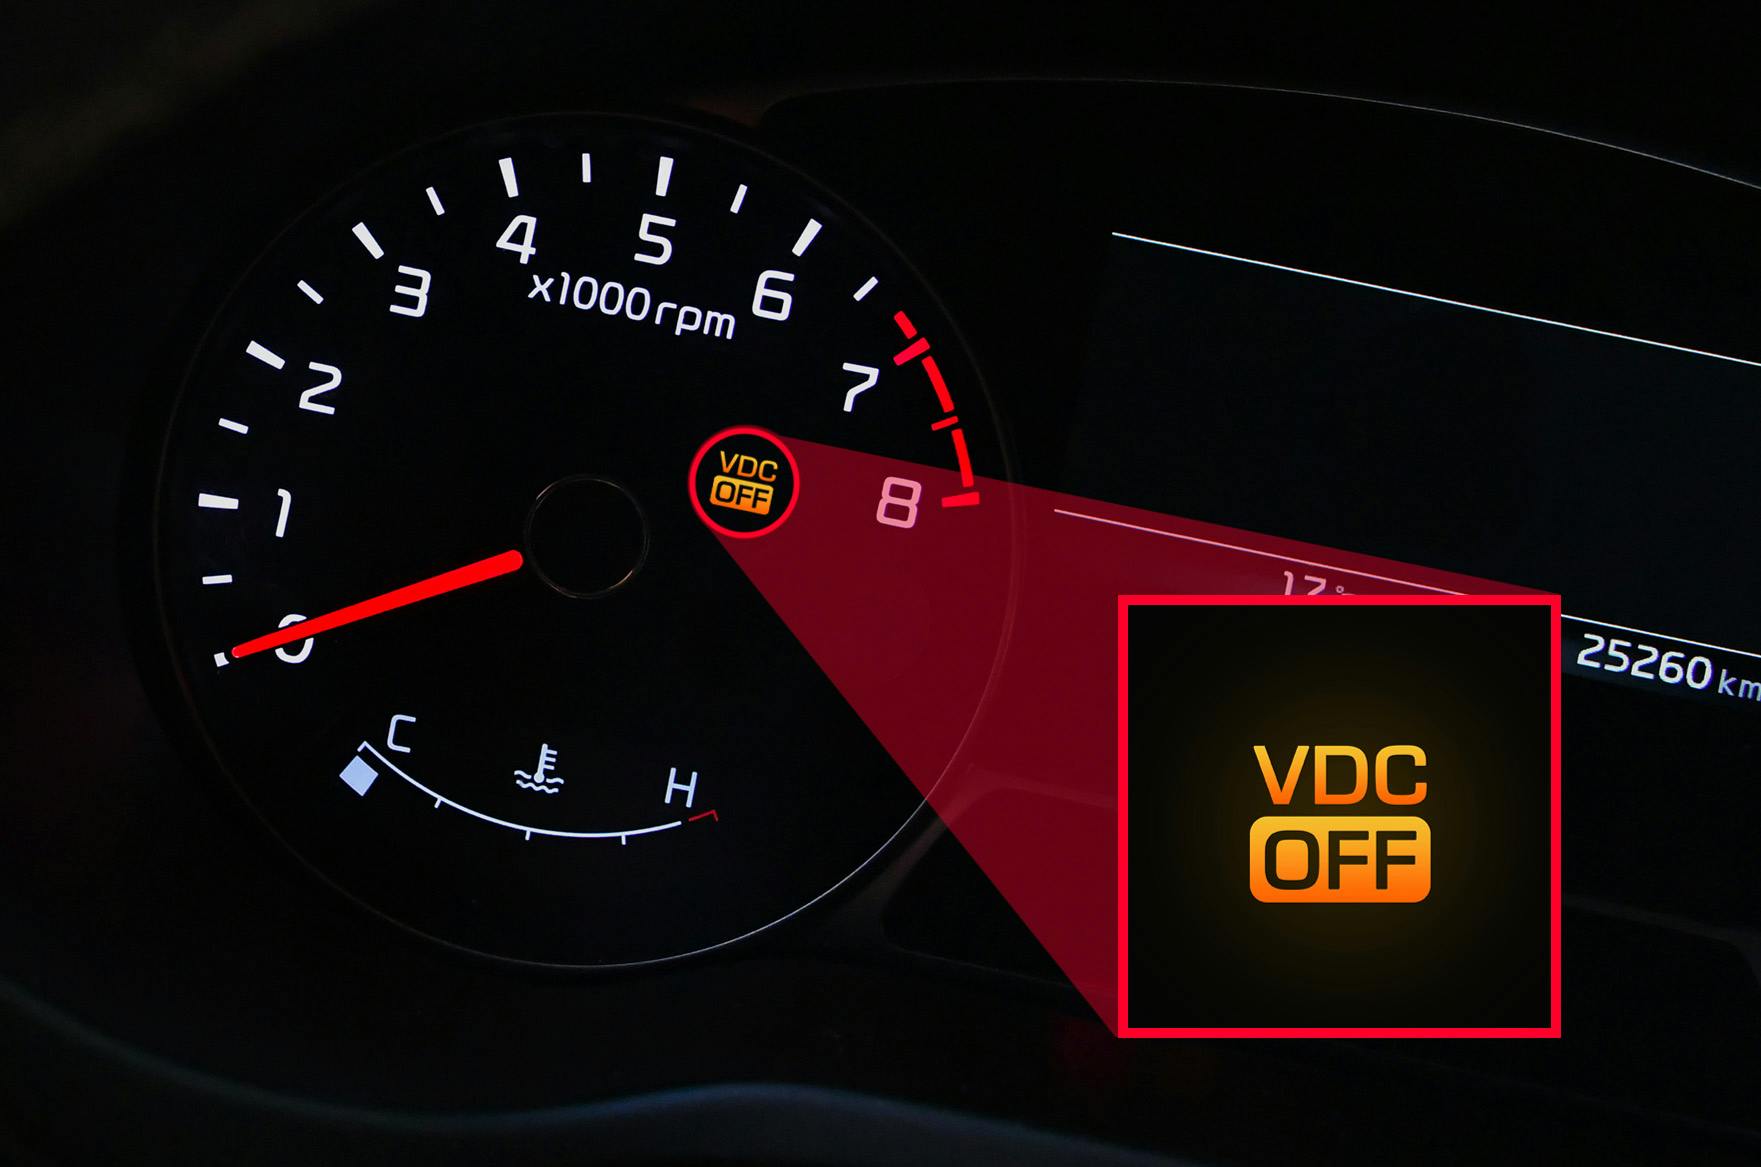 VDC: How does the vehicle dynamic control system work?